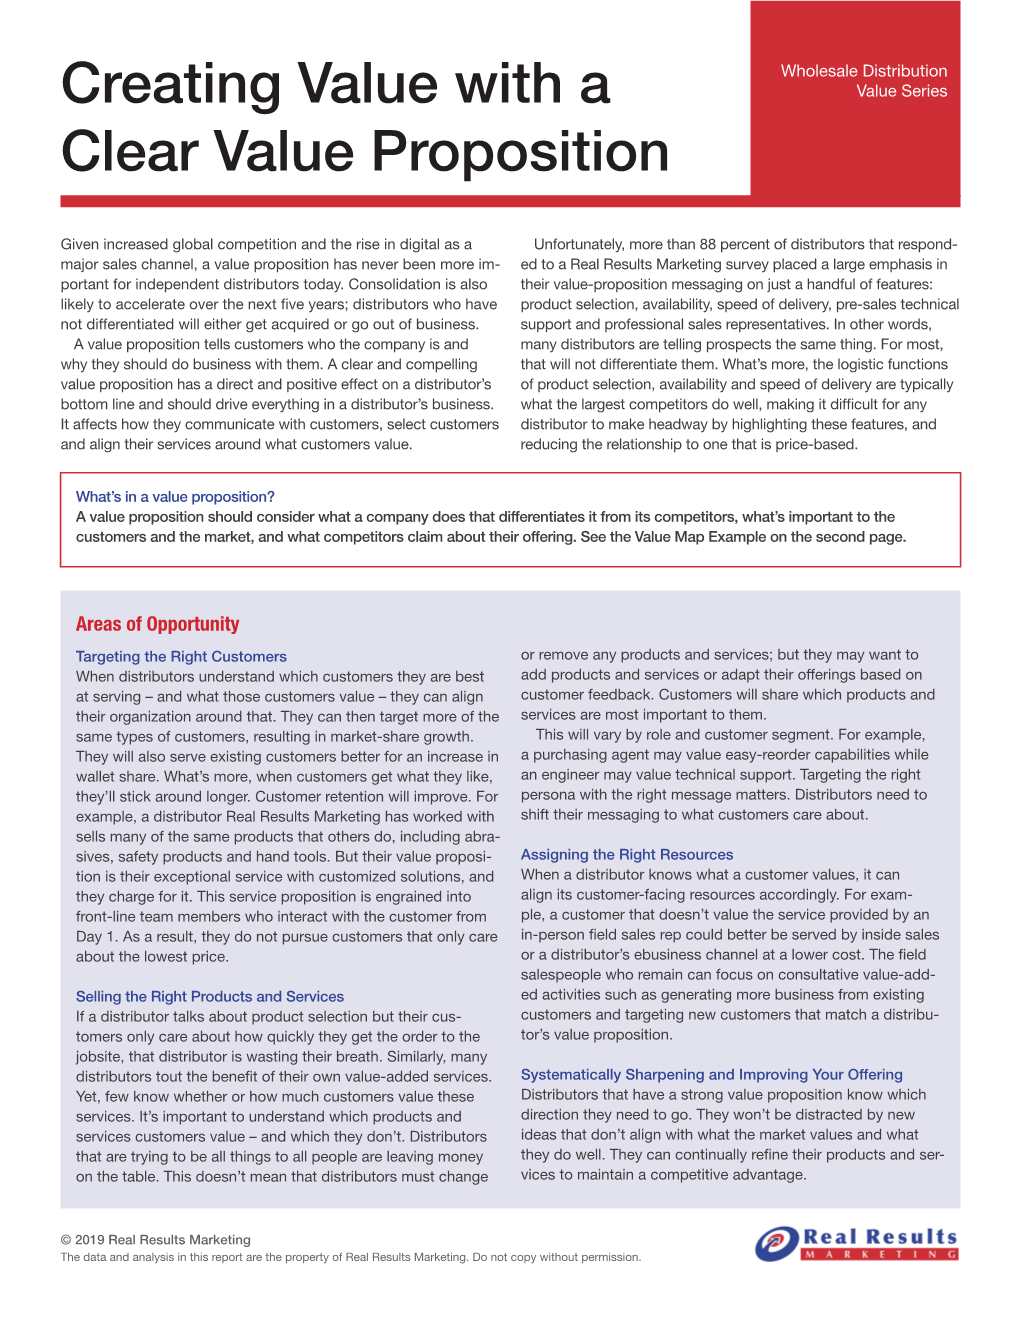 Creating Value with a Clear Value Proposition